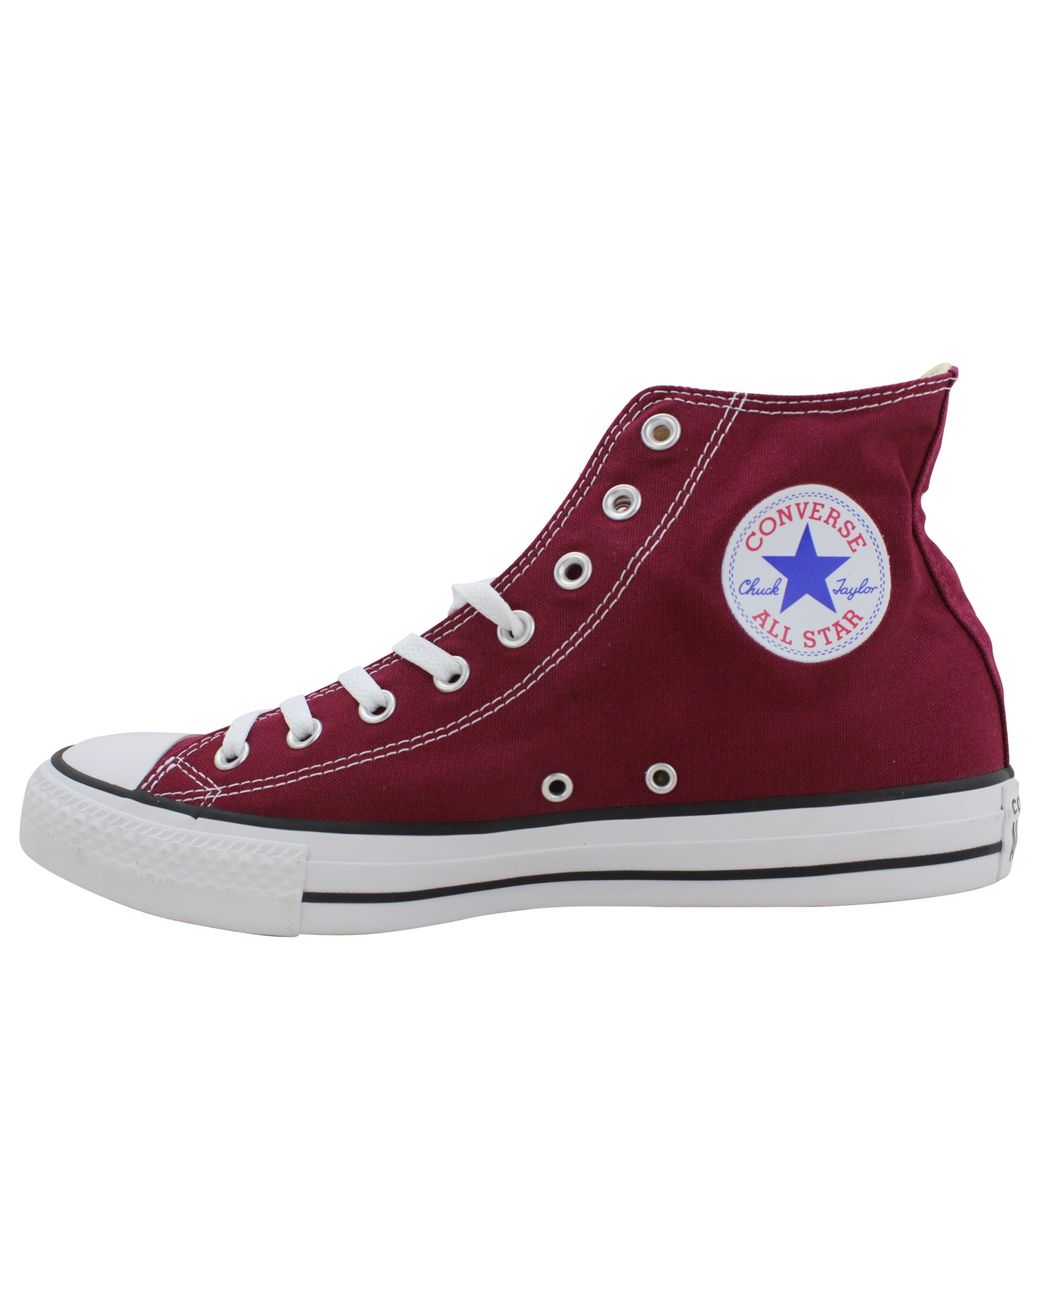 Converse All Star Hi Maroon/white M9613 in Red for Men | Lyst